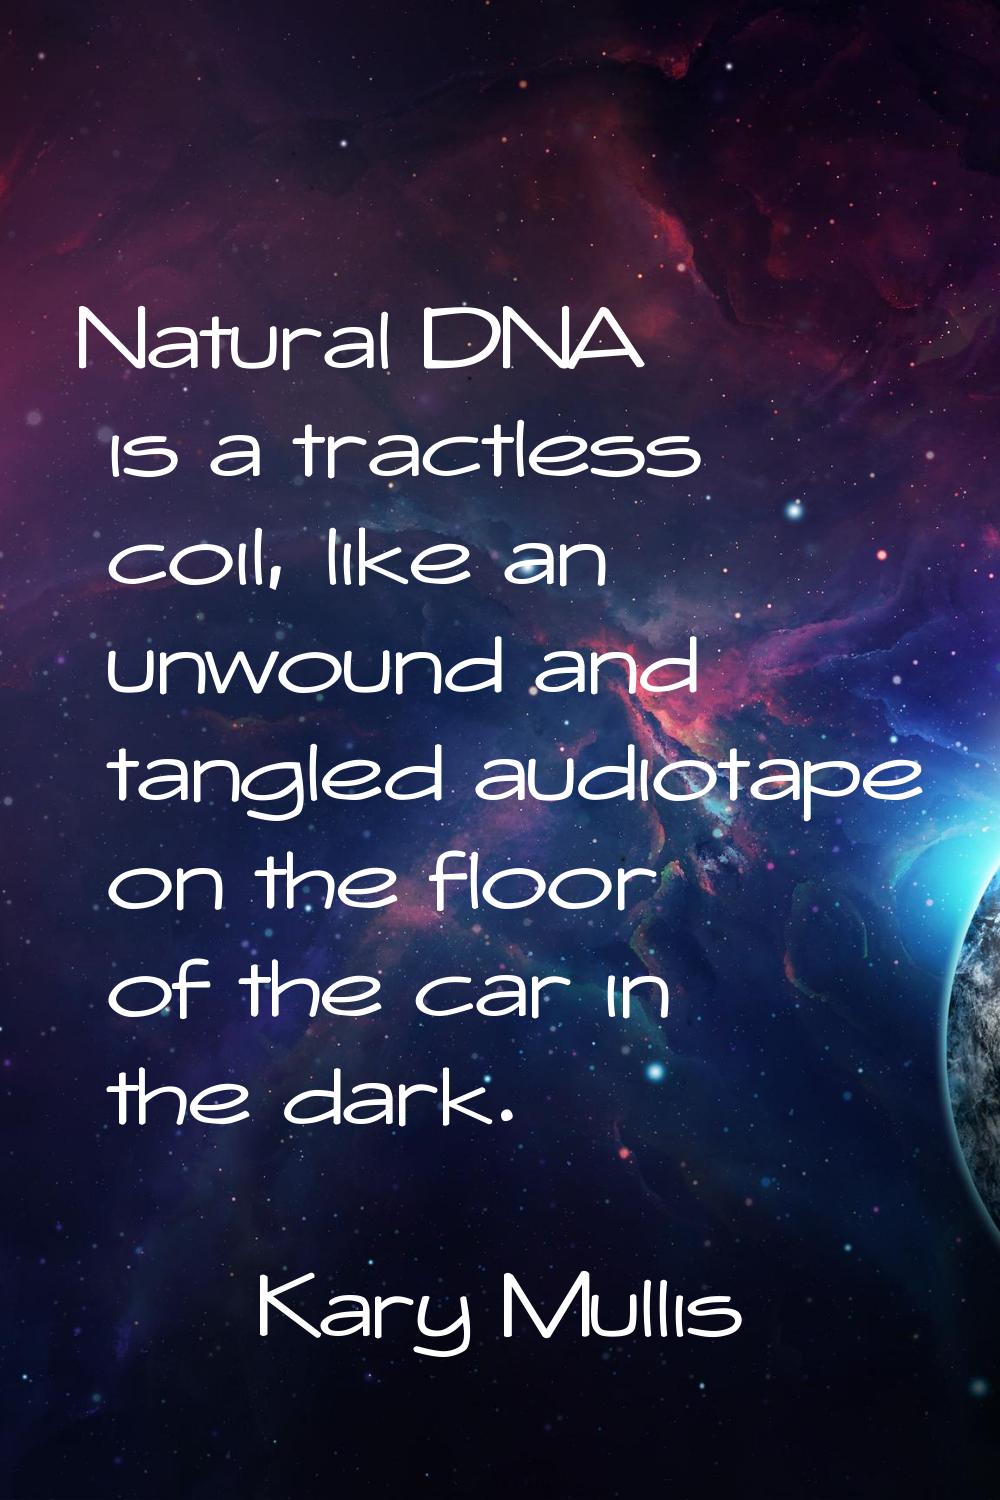 Natural DNA is a tractless coil, like an unwound and tangled audiotape on the floor of the car in t